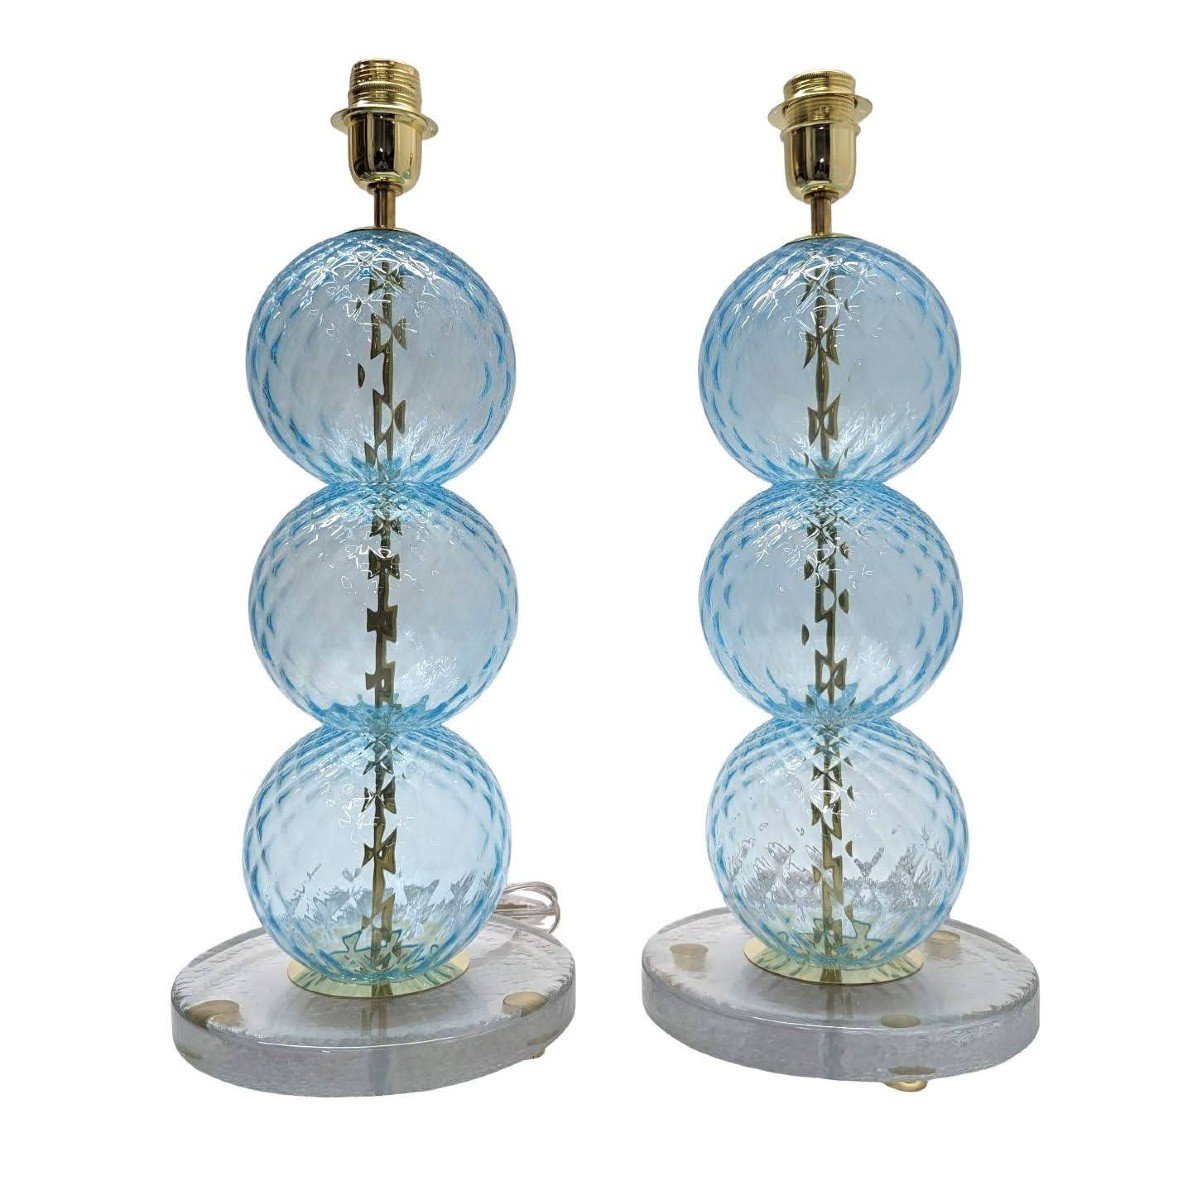 Pair Of Colorful Murano Blown Glass Lamps With 3 Balls